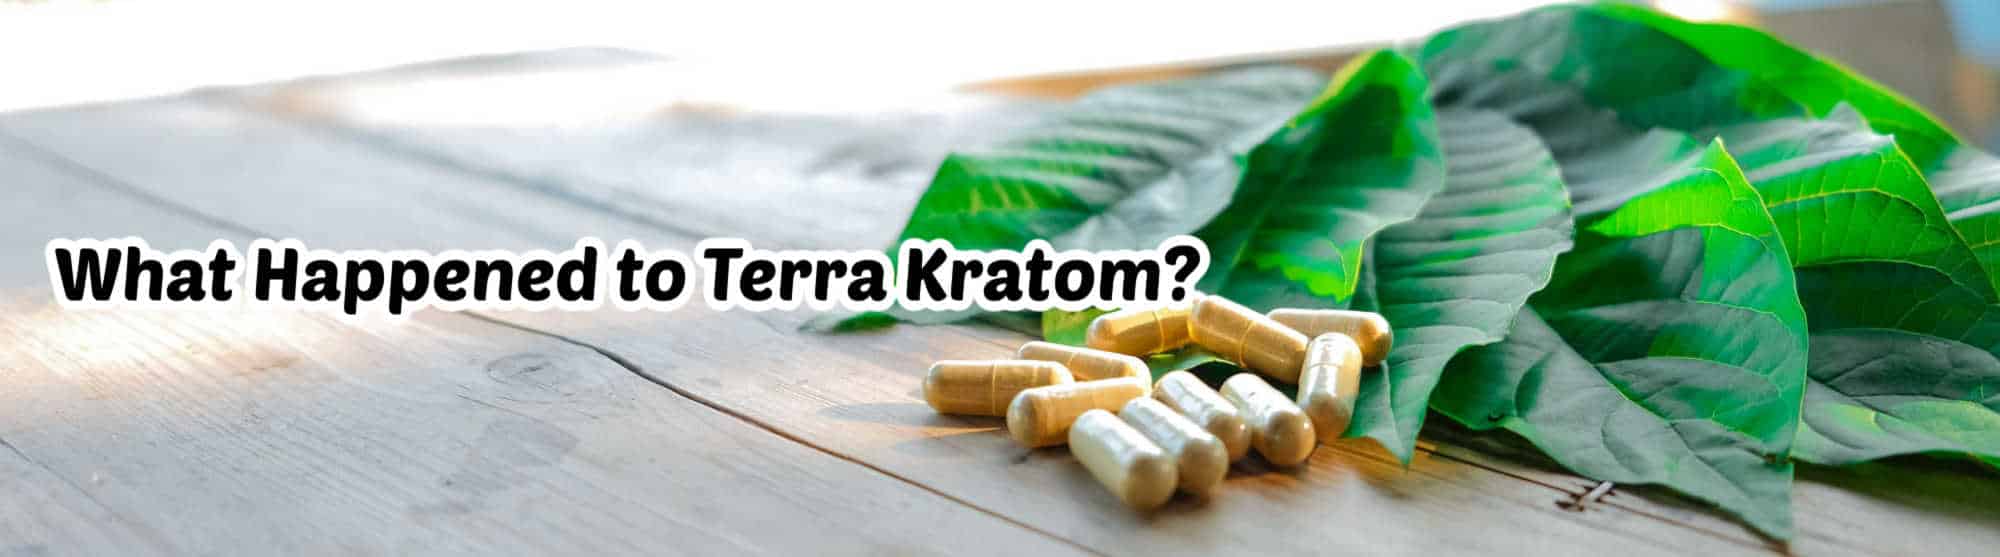 Terra Kratom & the FDA Crackdown : What You Need to Know